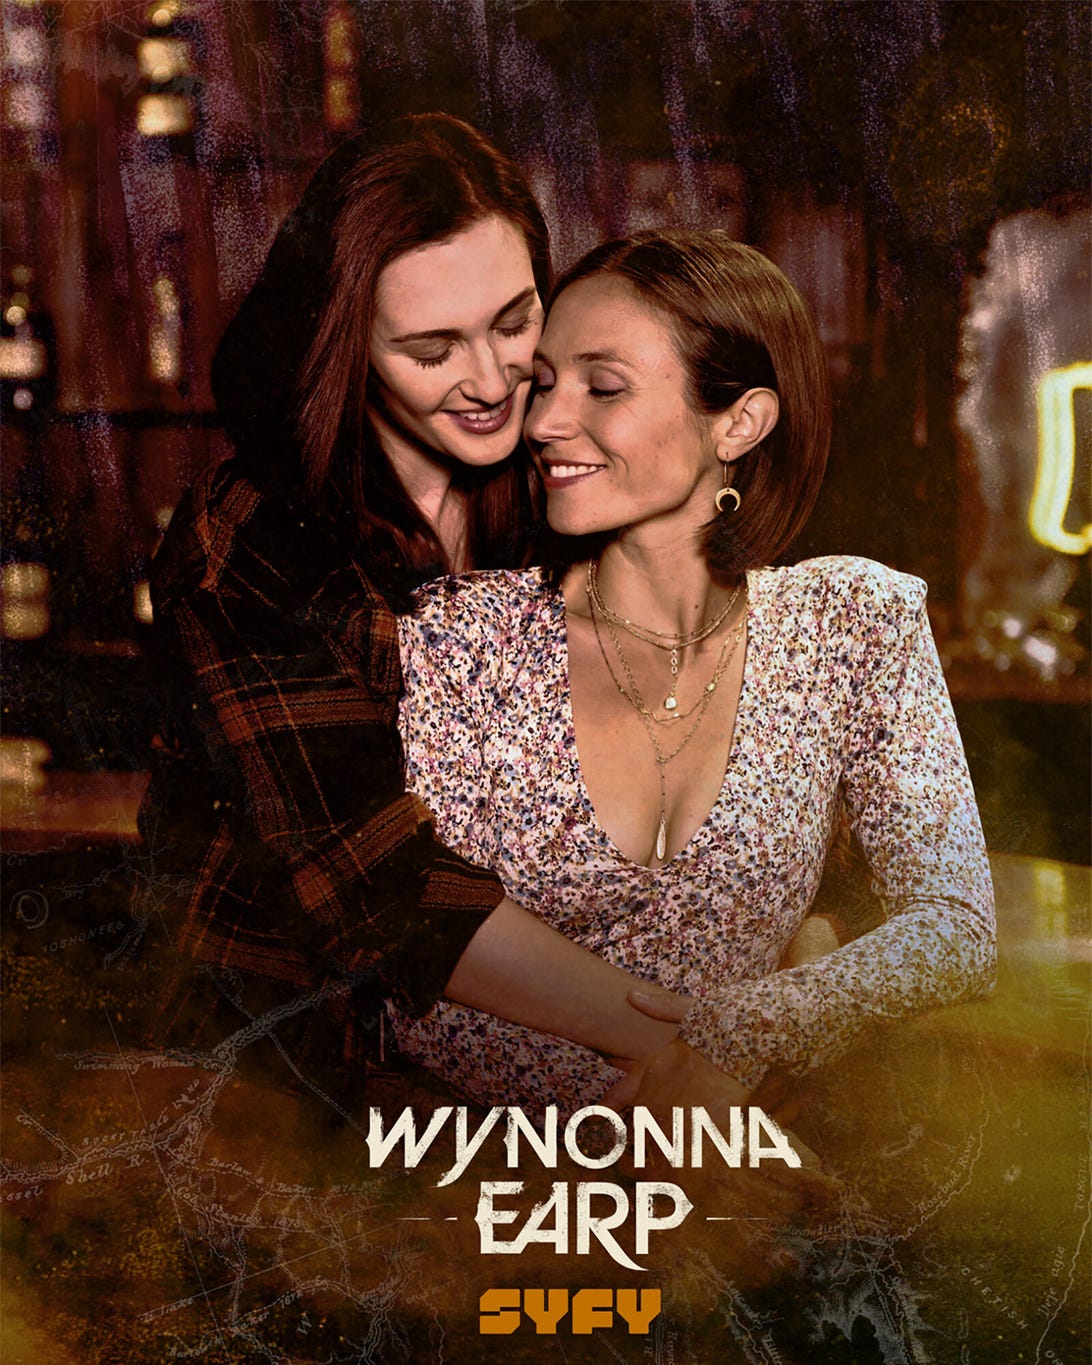 Katherine Barrell and Dominique Provost-Chalkley, Wynonna Earp